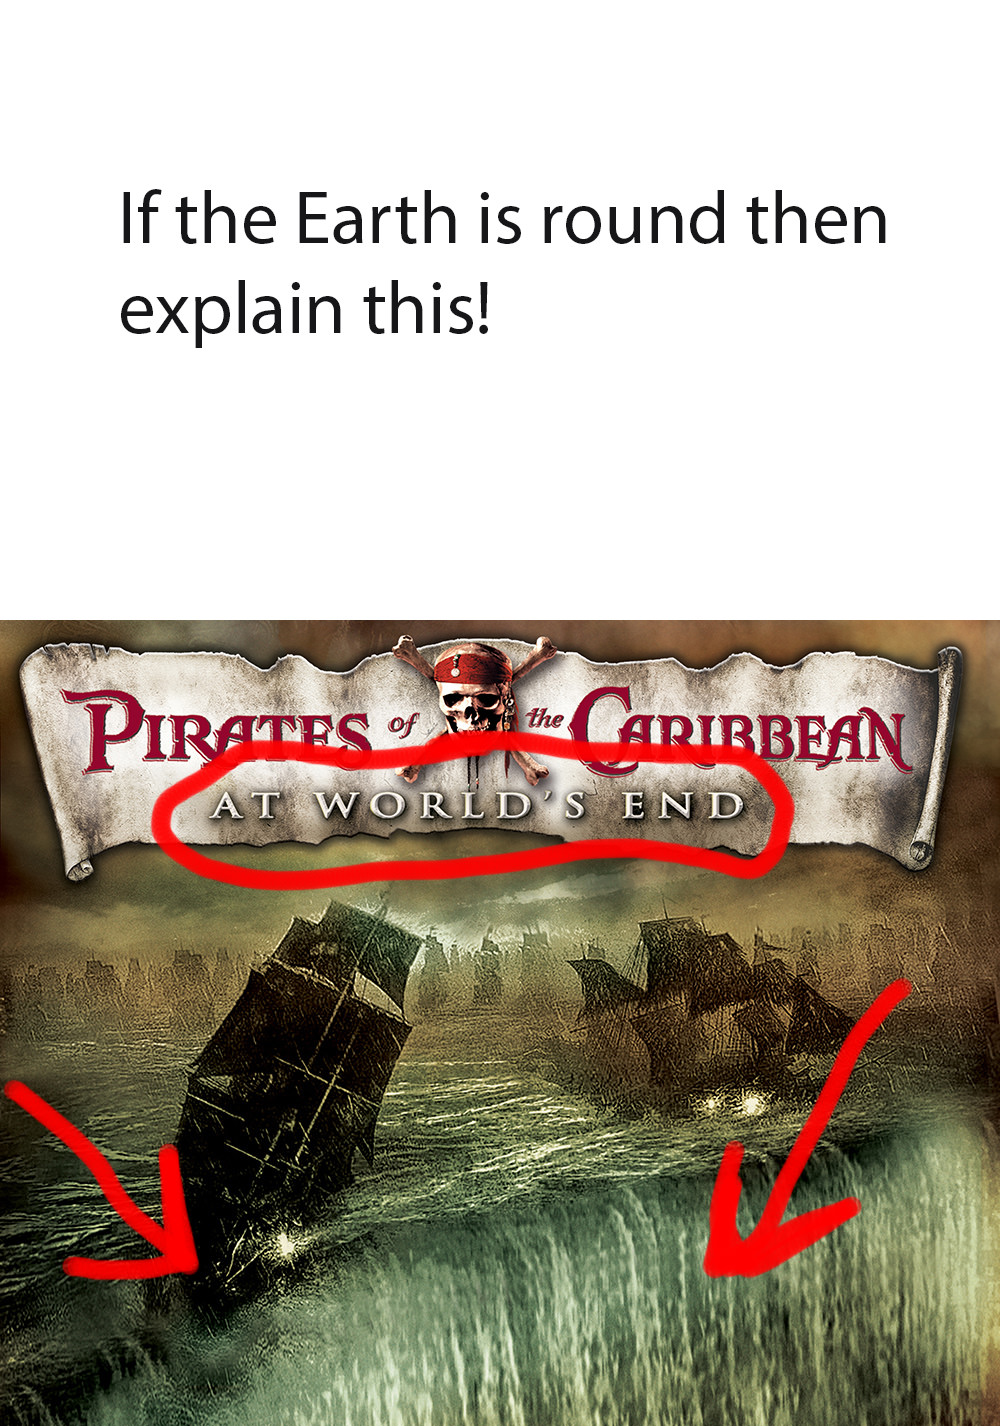 pirates of the caribbean at world's end poster - If the Earth is round then explain this! Pirates O the Caribbean At World'S End